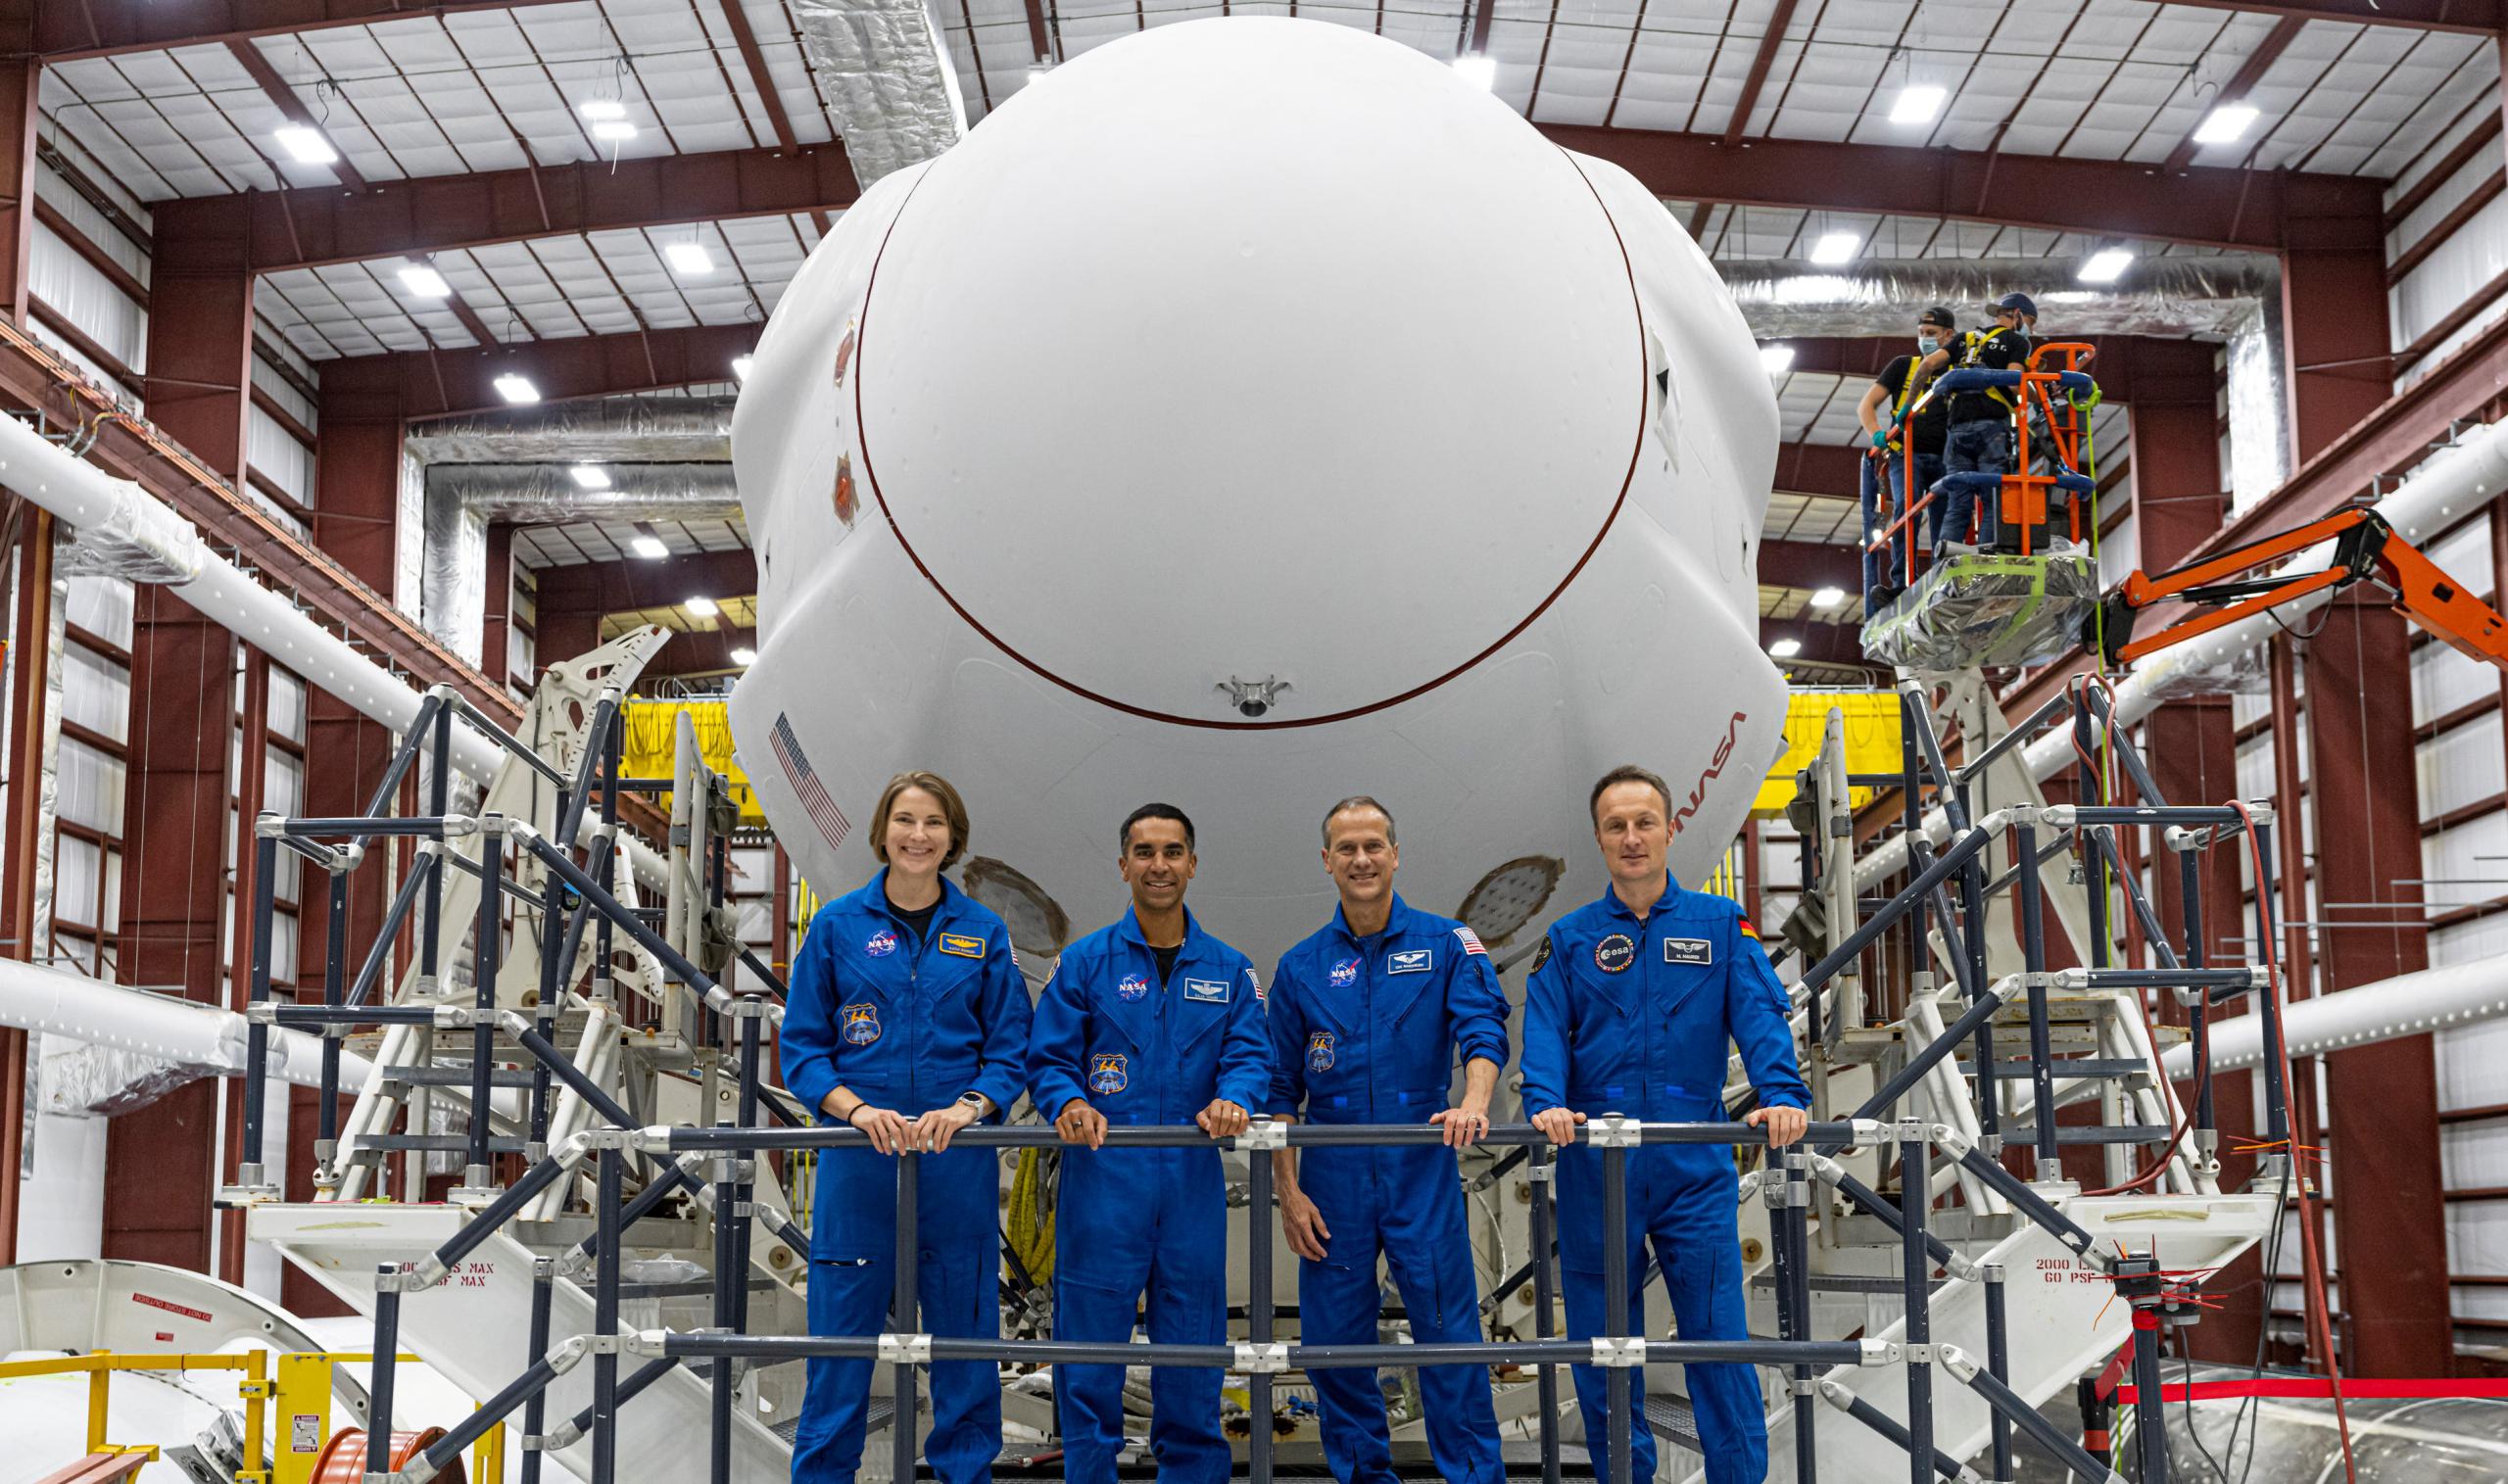 Crew-3 Dragon C210 F9 B1067 39A rollout 102721 (SpaceX) 5 crop (c)